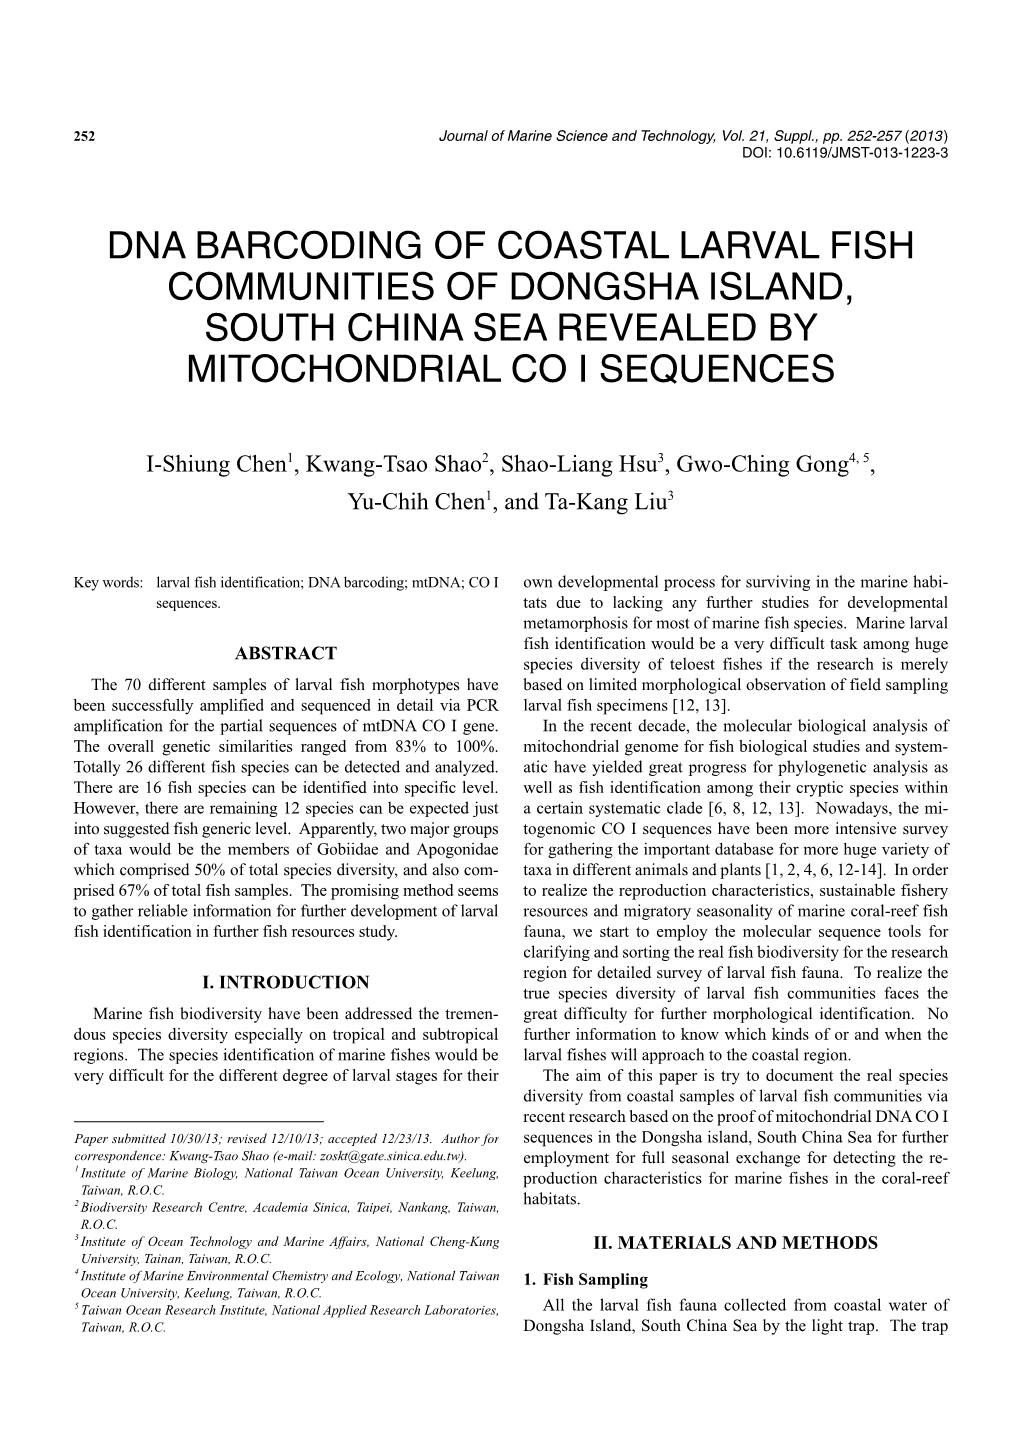 Dna Barcoding of Coastal Larval Fish Communities of Dongsha Island, South China Sea Revealed by Mitochondrial Co I Sequences